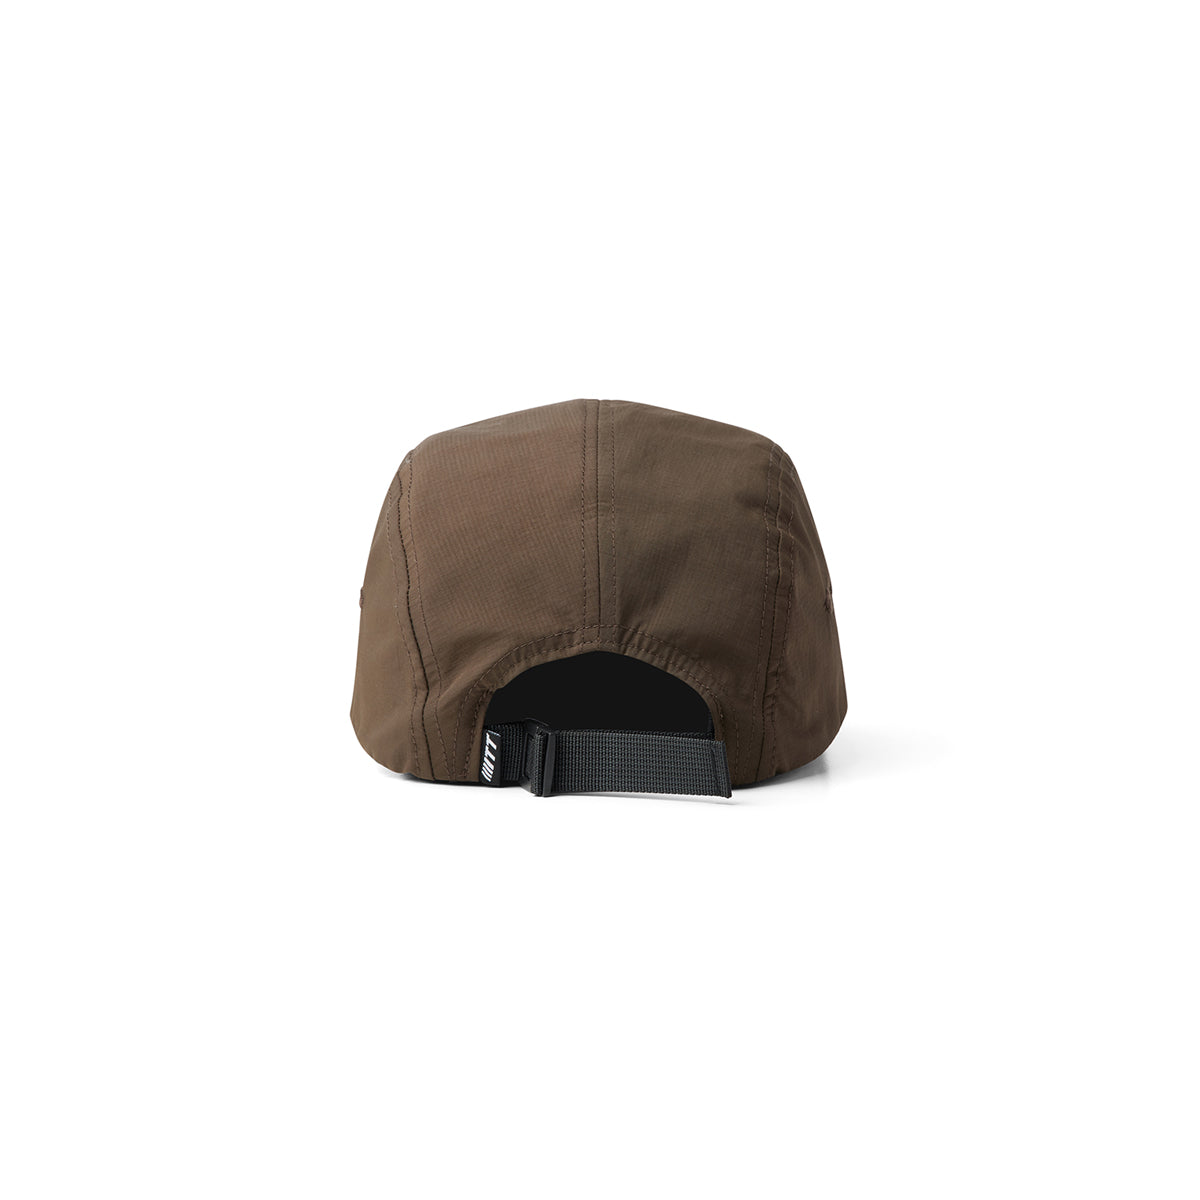 Track Day 5 Panel Camper Cap Military